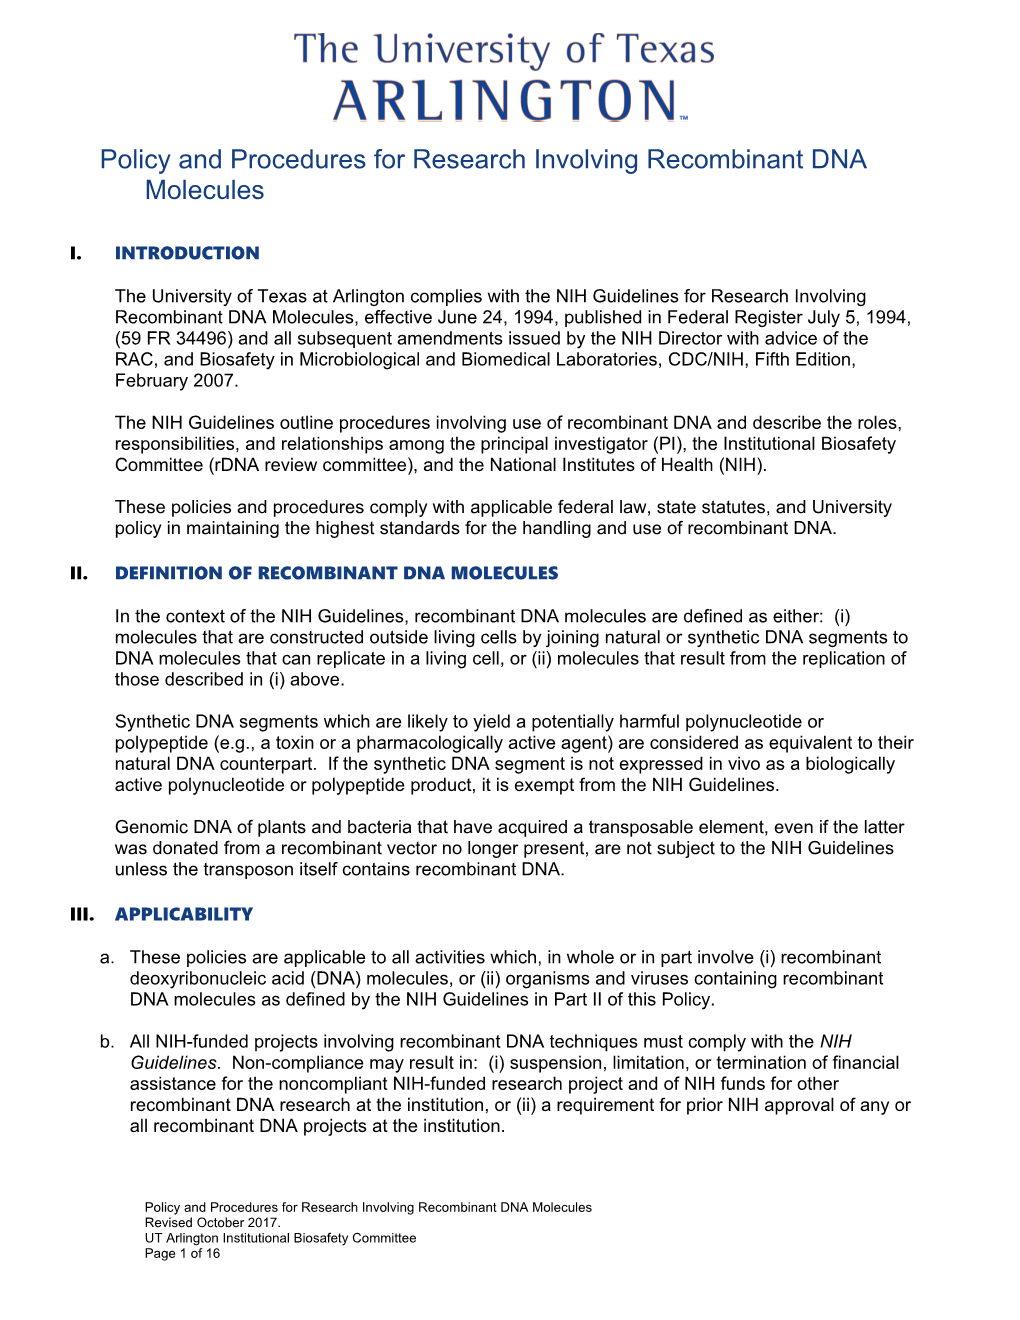 Policy and Procedures for Research Involving Recombinant DNA Molecules